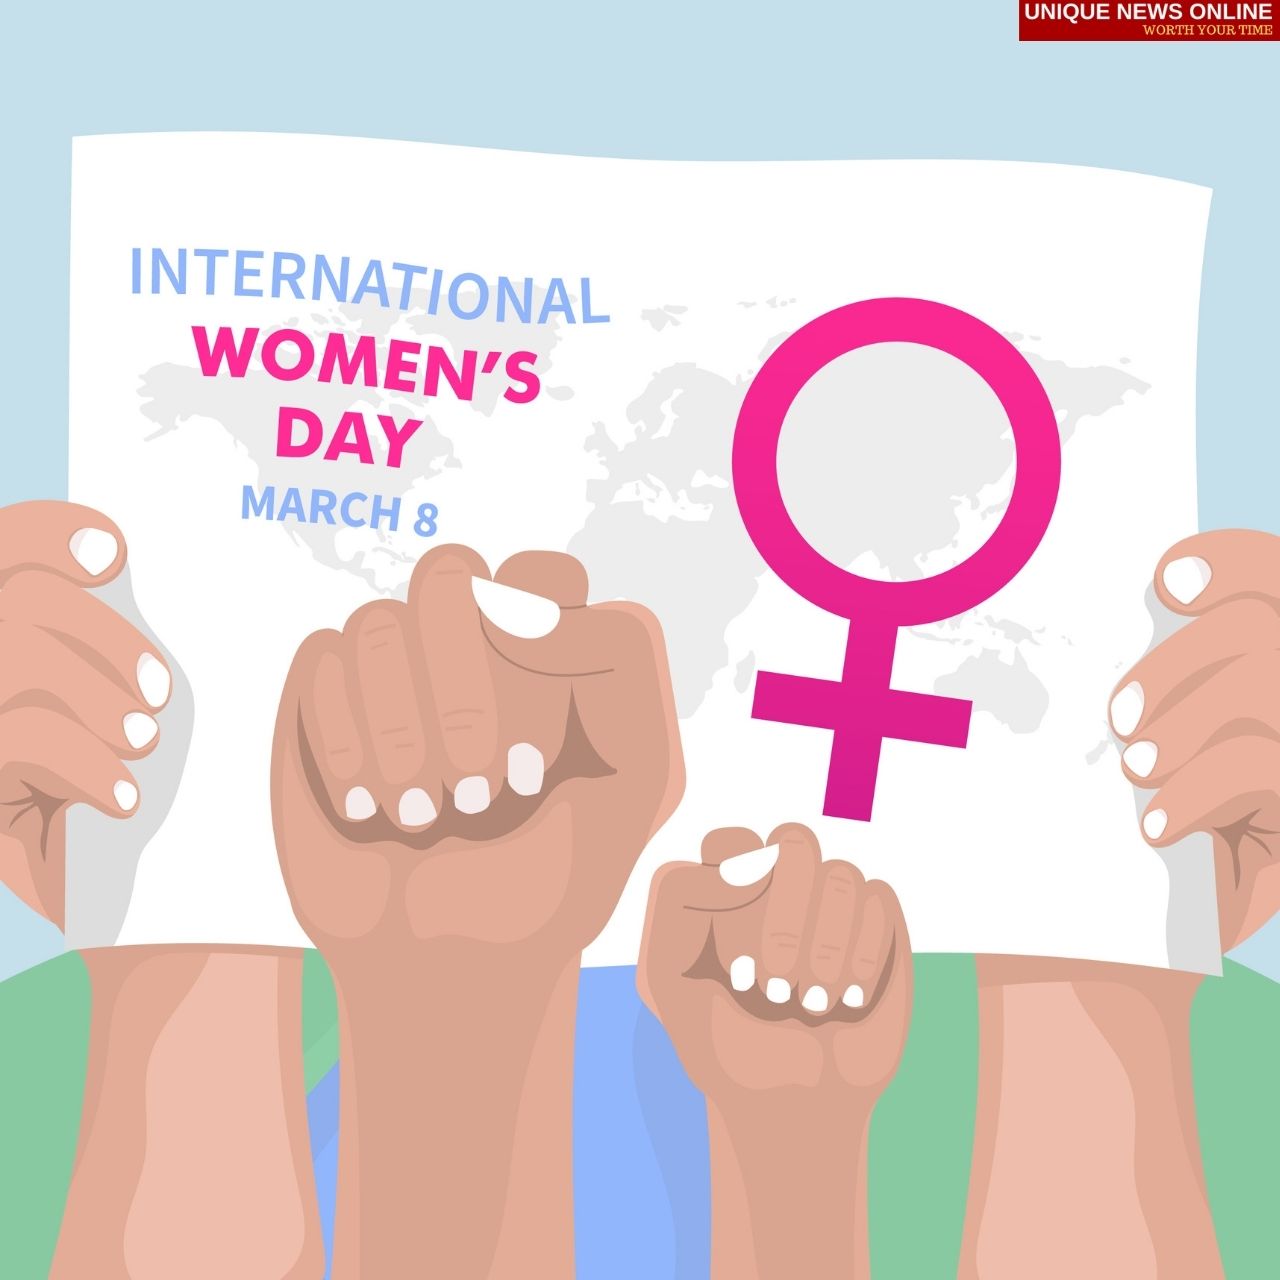 International Women's Day 2022 Wishes, Quotes, HD Images, Slogans, Messages, Greetings to Share